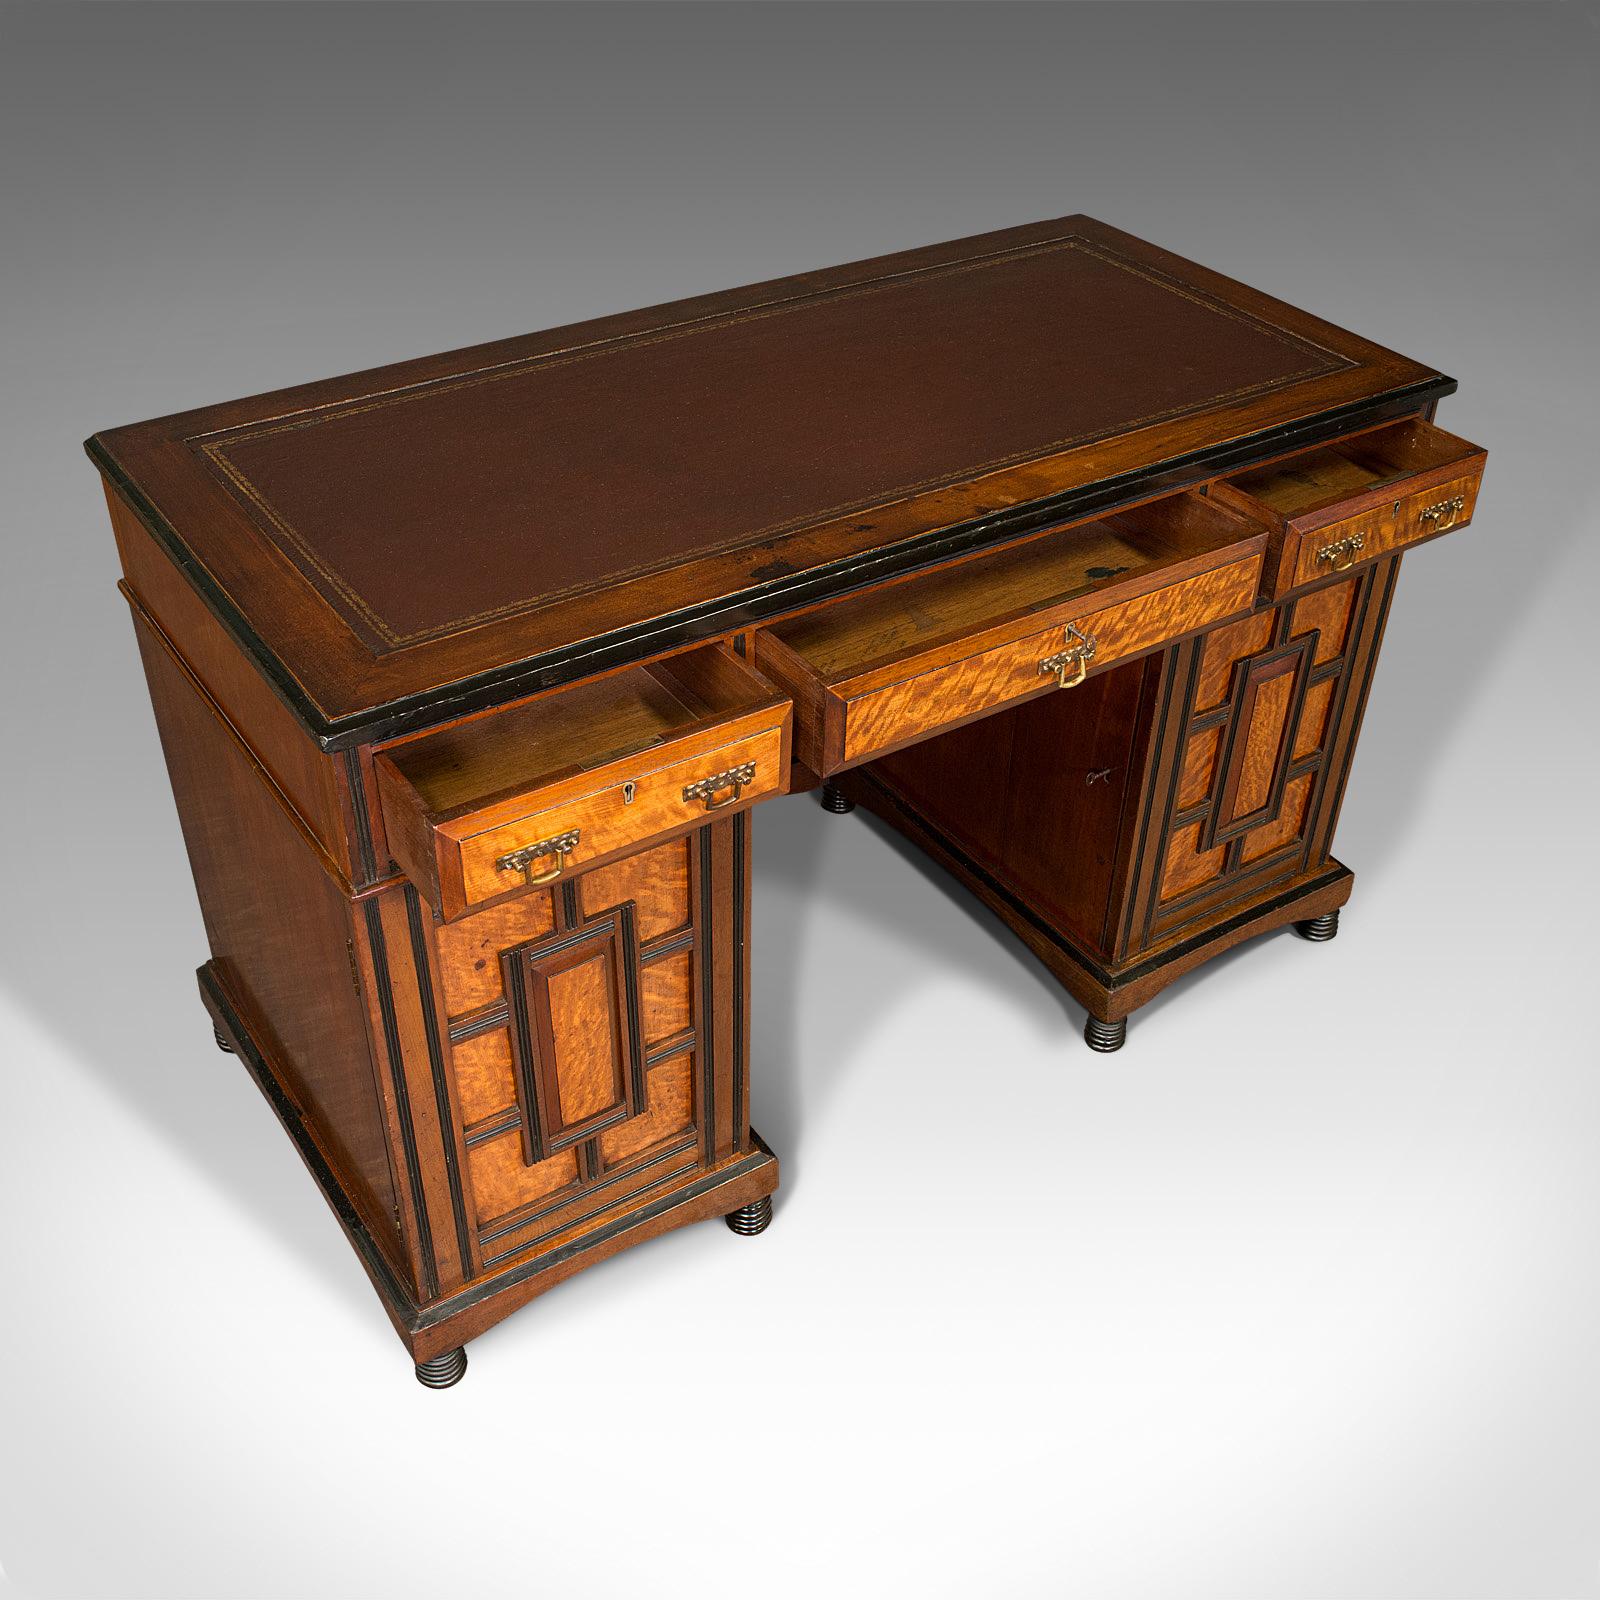 Antique Ladies Morning Room Desk, English, Writing Table, Aesthetic Period, 1880 1